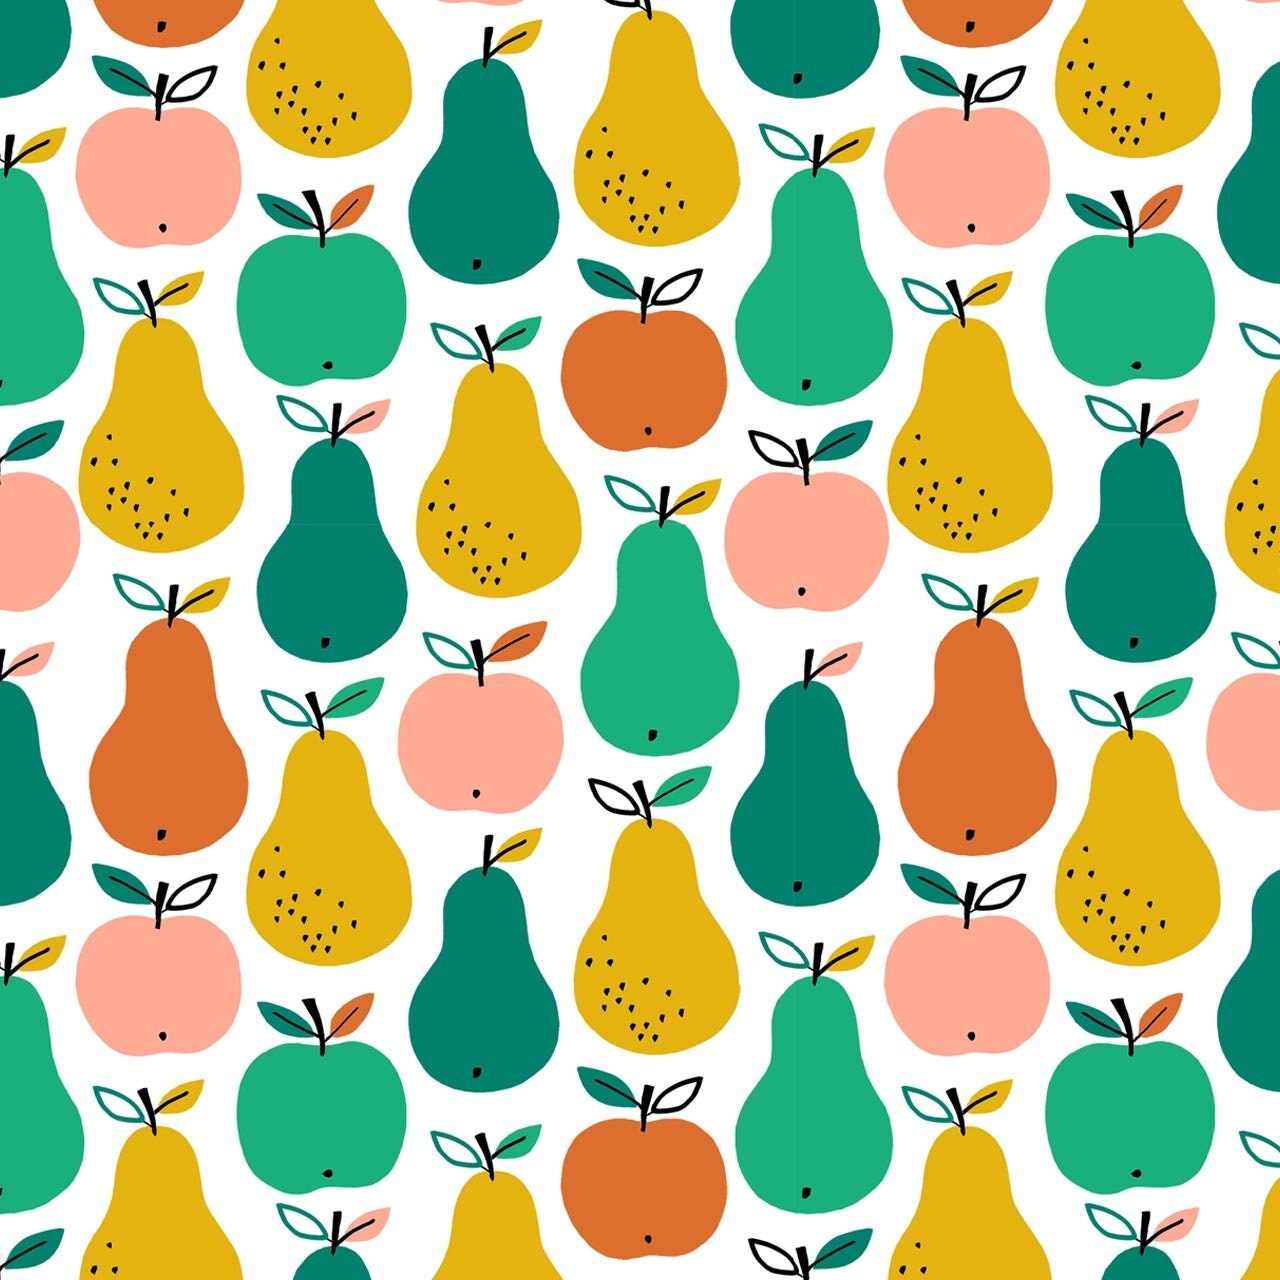 Acorn Wood is from Dashwood Studio, It is a brightly coloured fabric with lots of fruits such as pears and apples. The fabric has a white background and is 100% cotton.. The fabric is 44 inches wide.